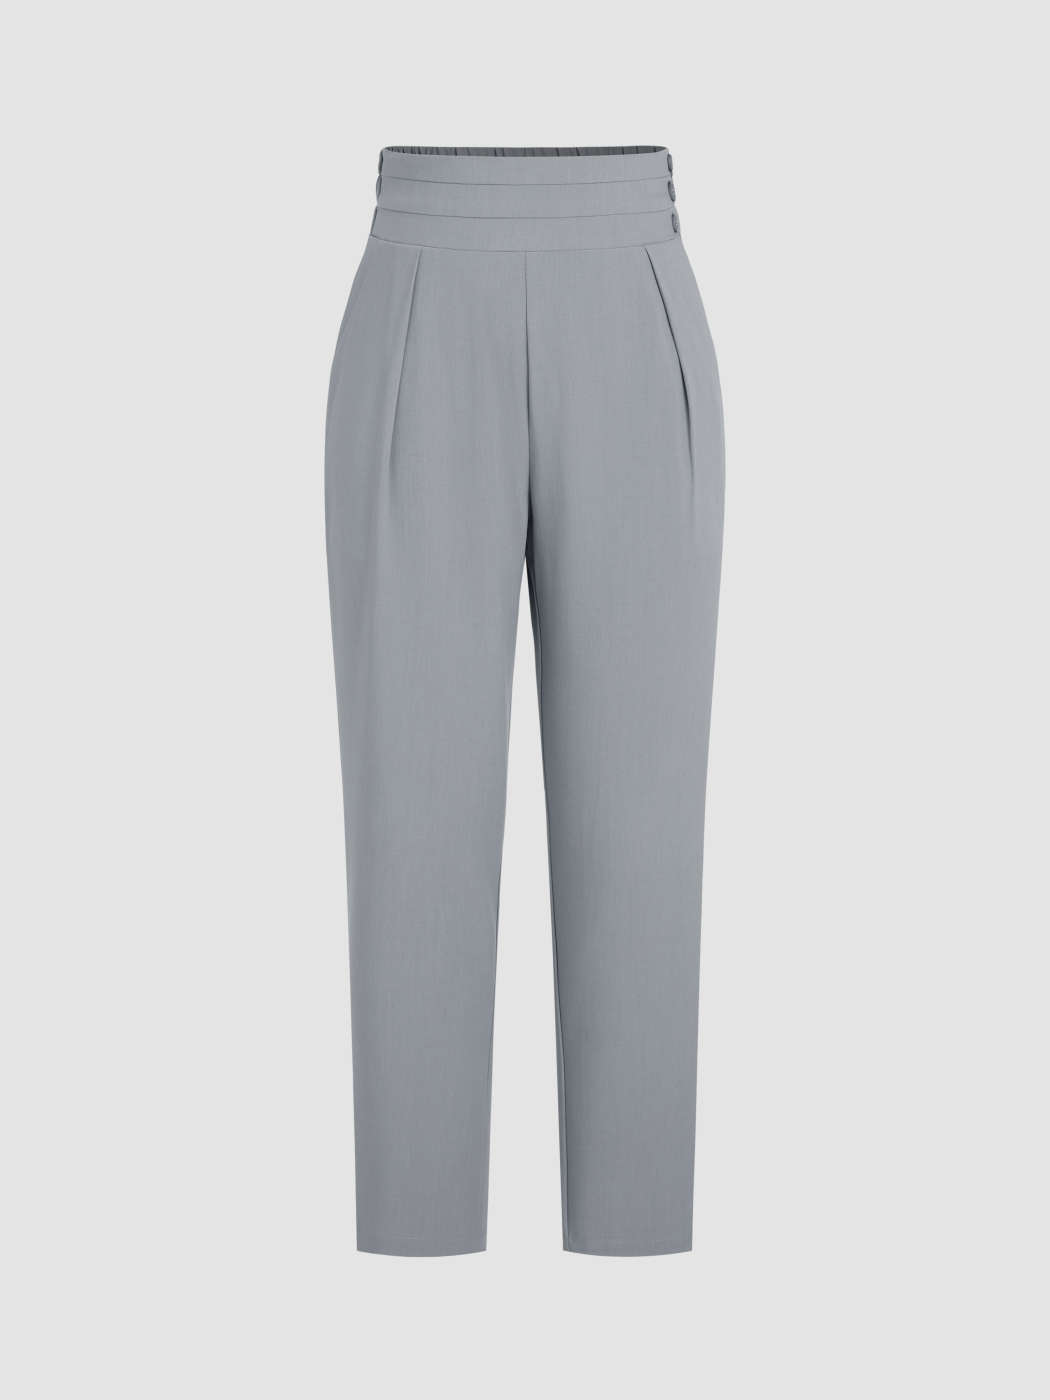 High Waist Solid Tapered Trousers - Cider